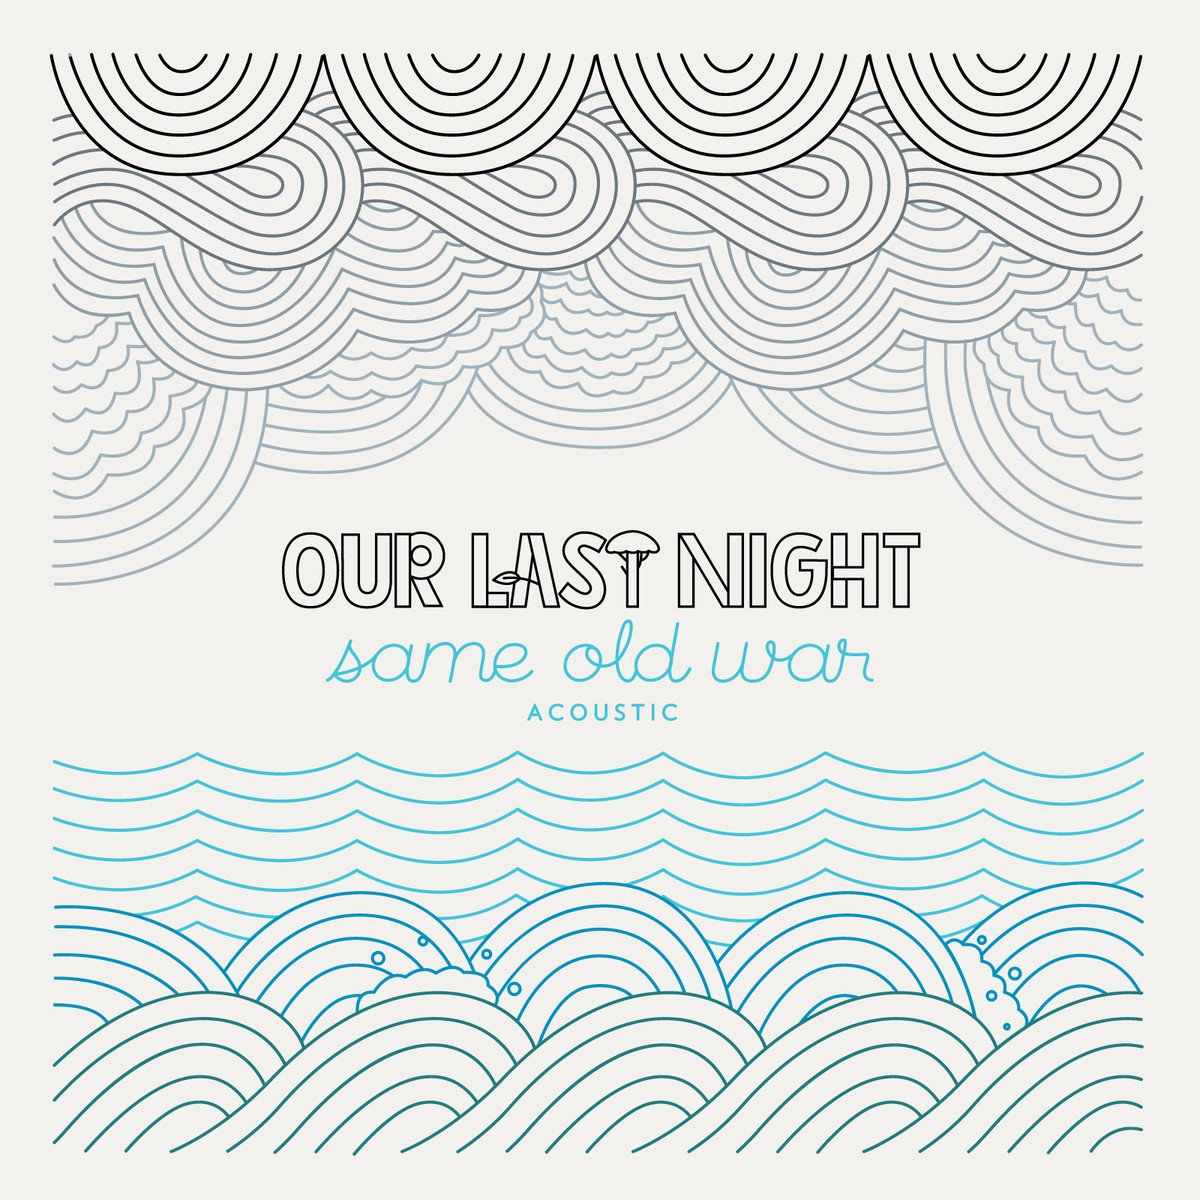 When the party last night. Our last Night обложка. Our last Night альбомы. Our last Night Oak Island.